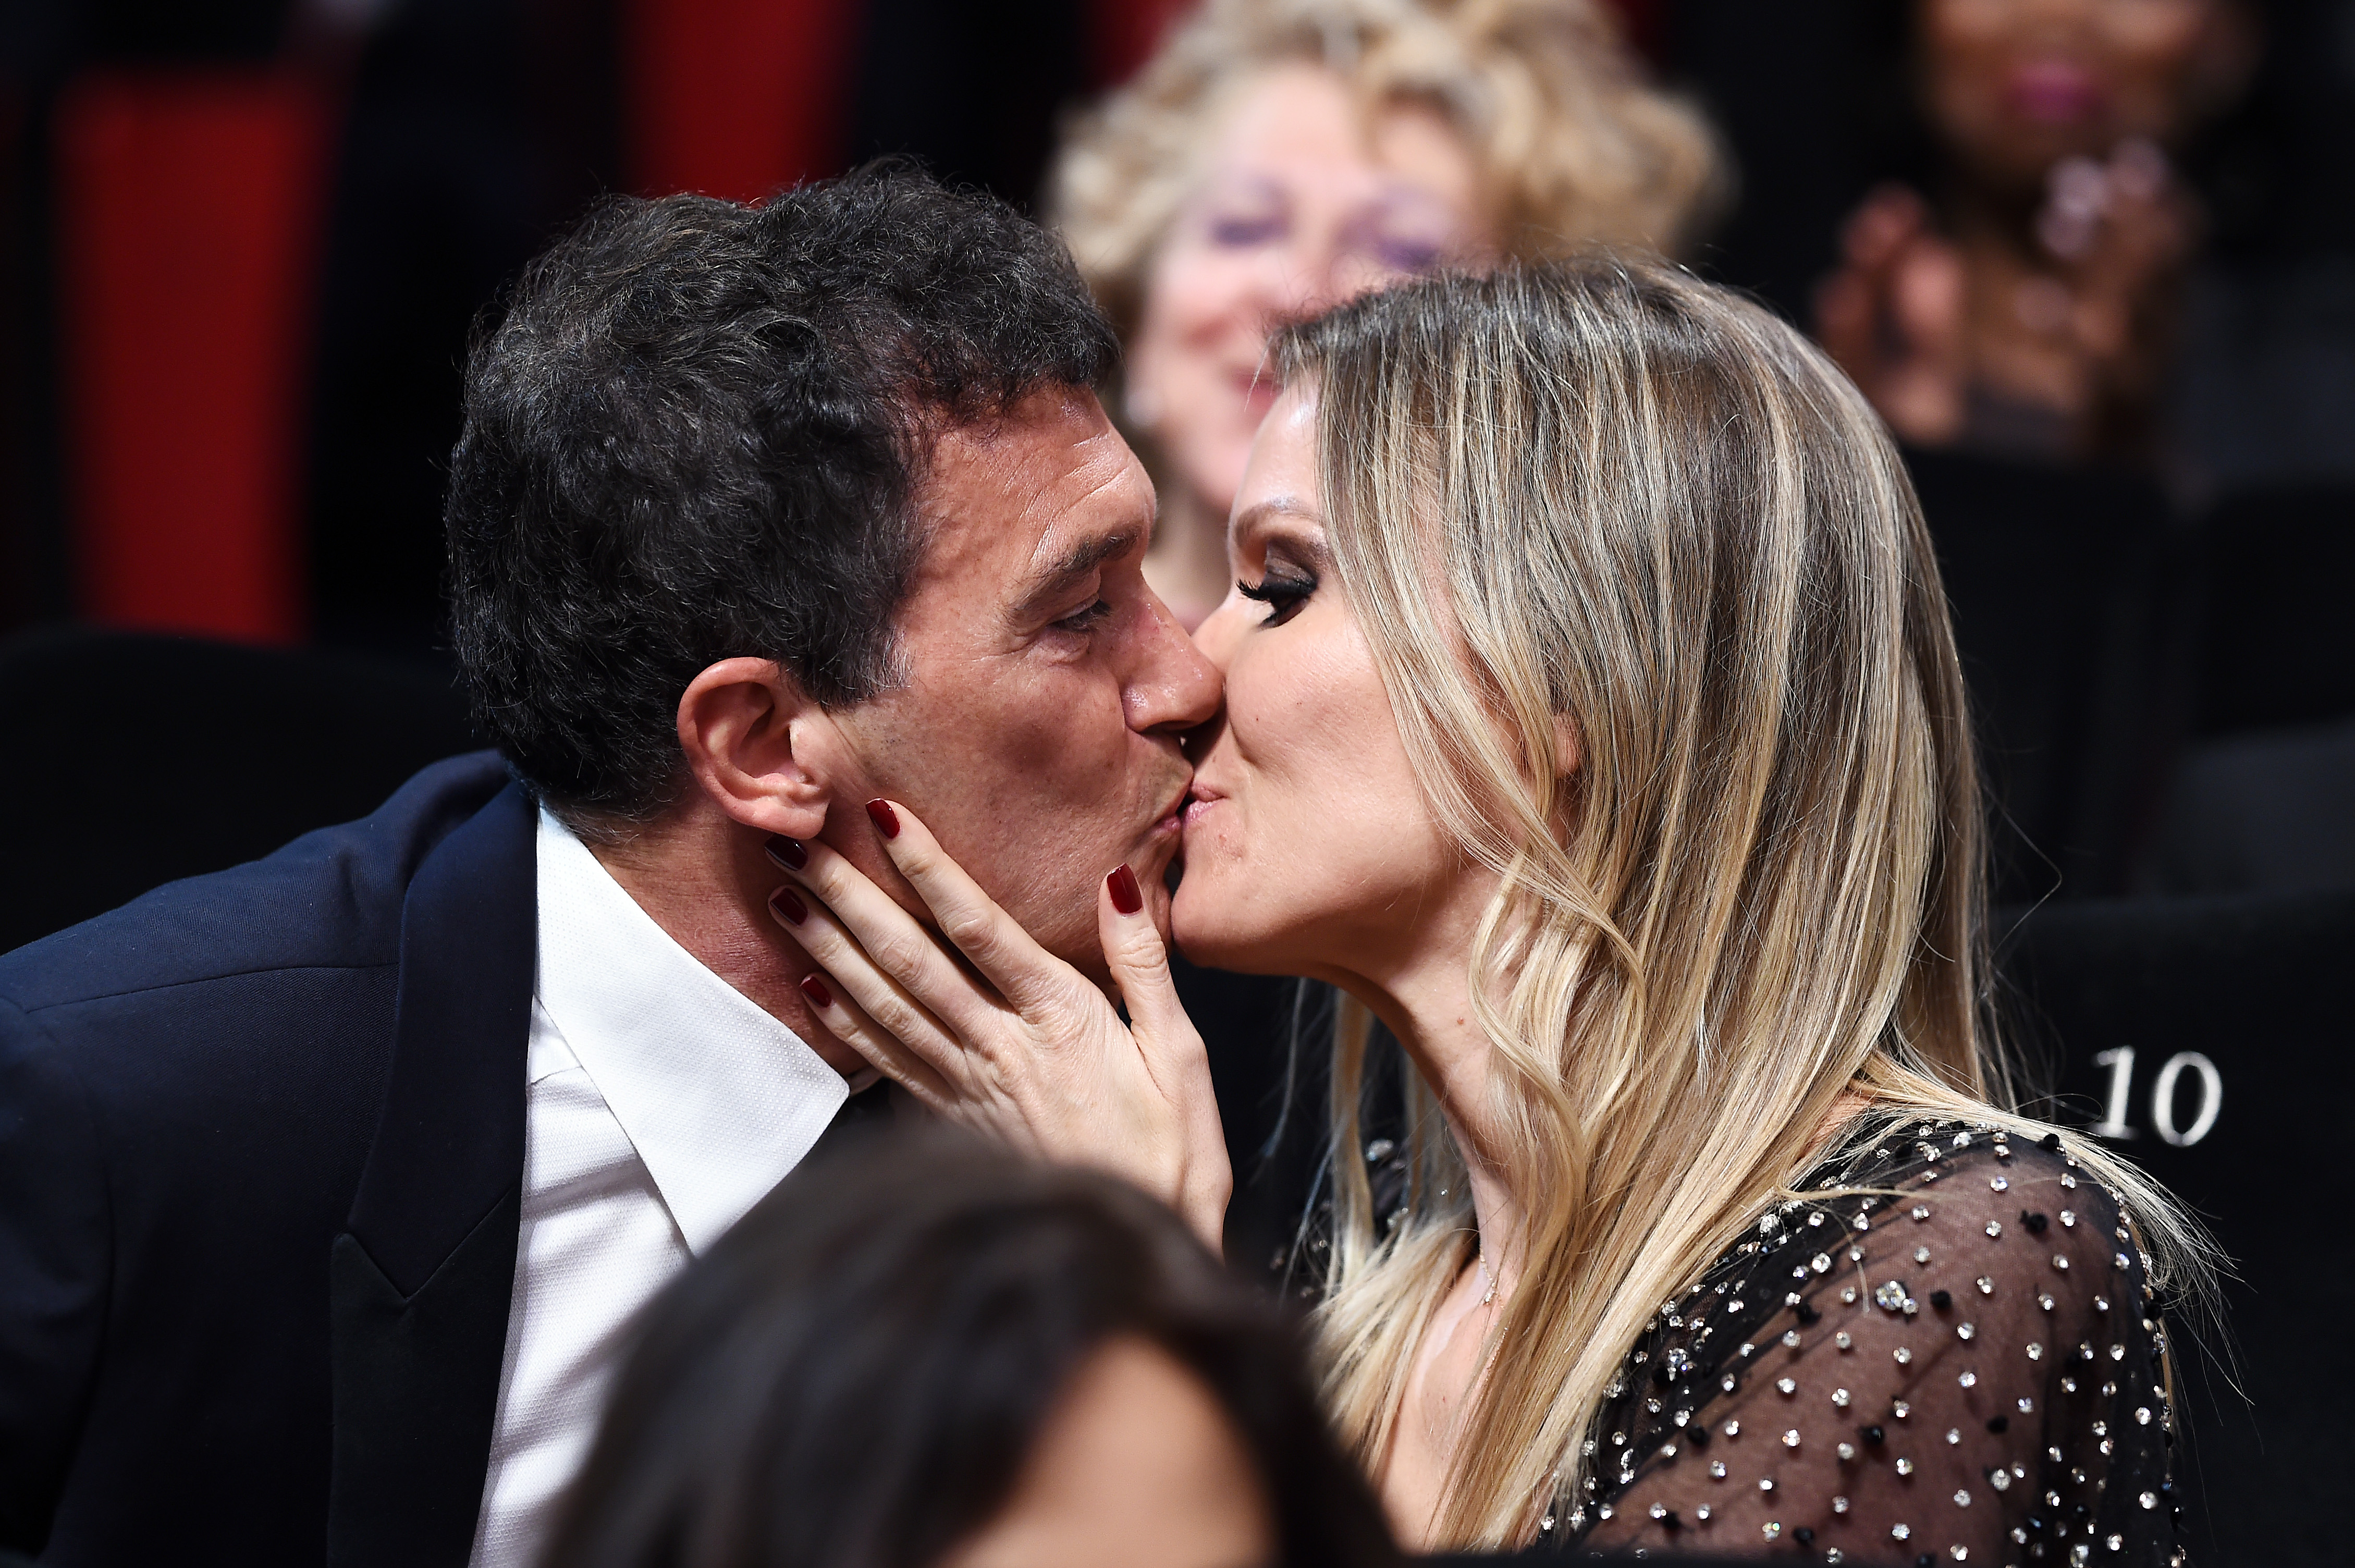 Antonio Banderas and Nicole Kempel at the 72nd Annual Cannes Film Festival on  May 25, 2019 | Source: Getty Images